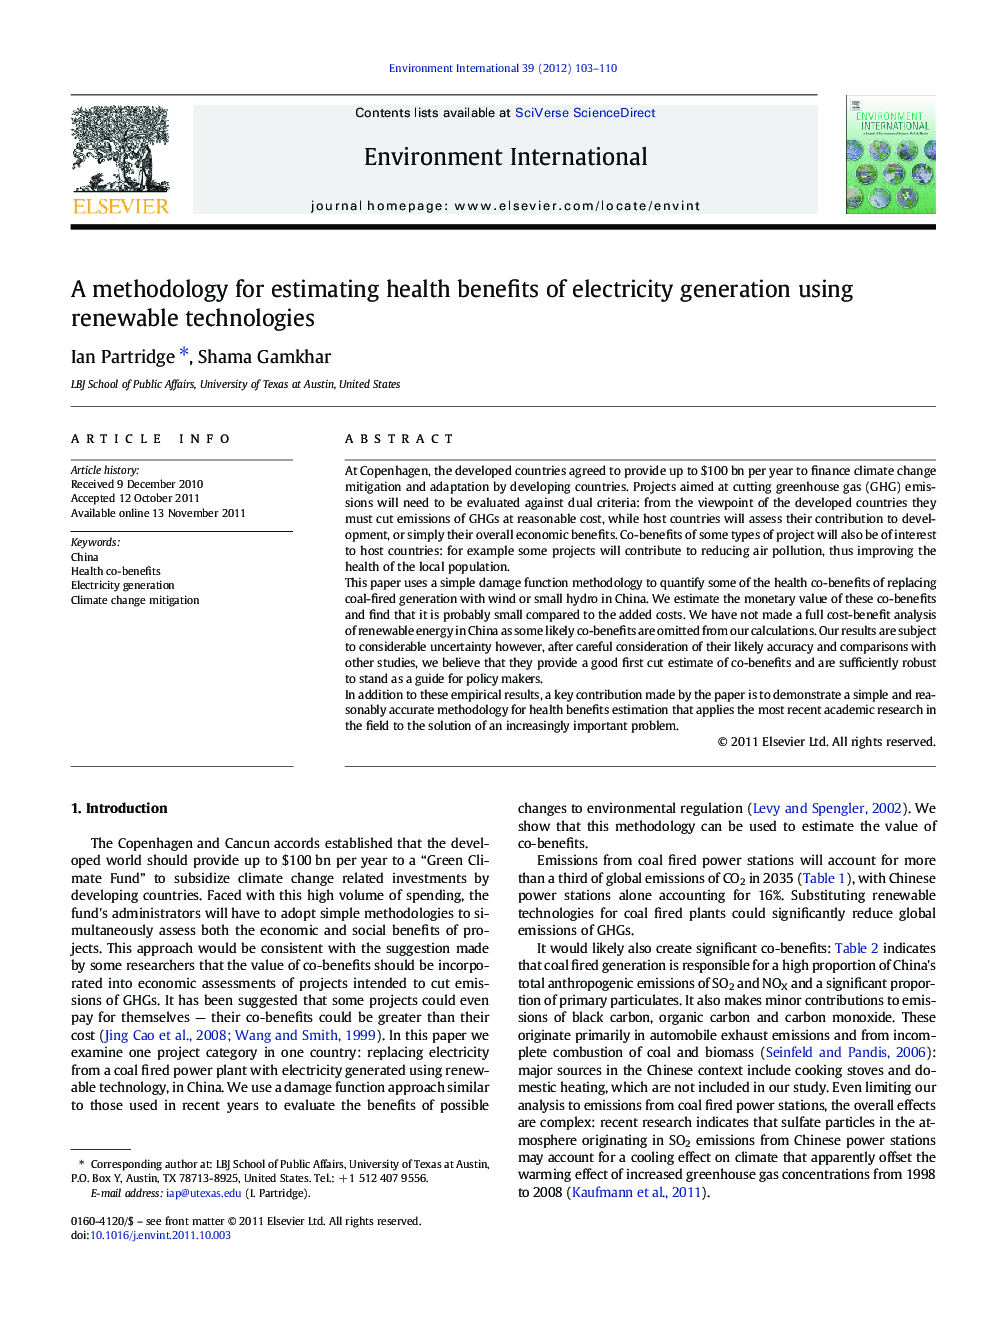 A methodology for estimating health benefits of electricity generation using renewable technologies